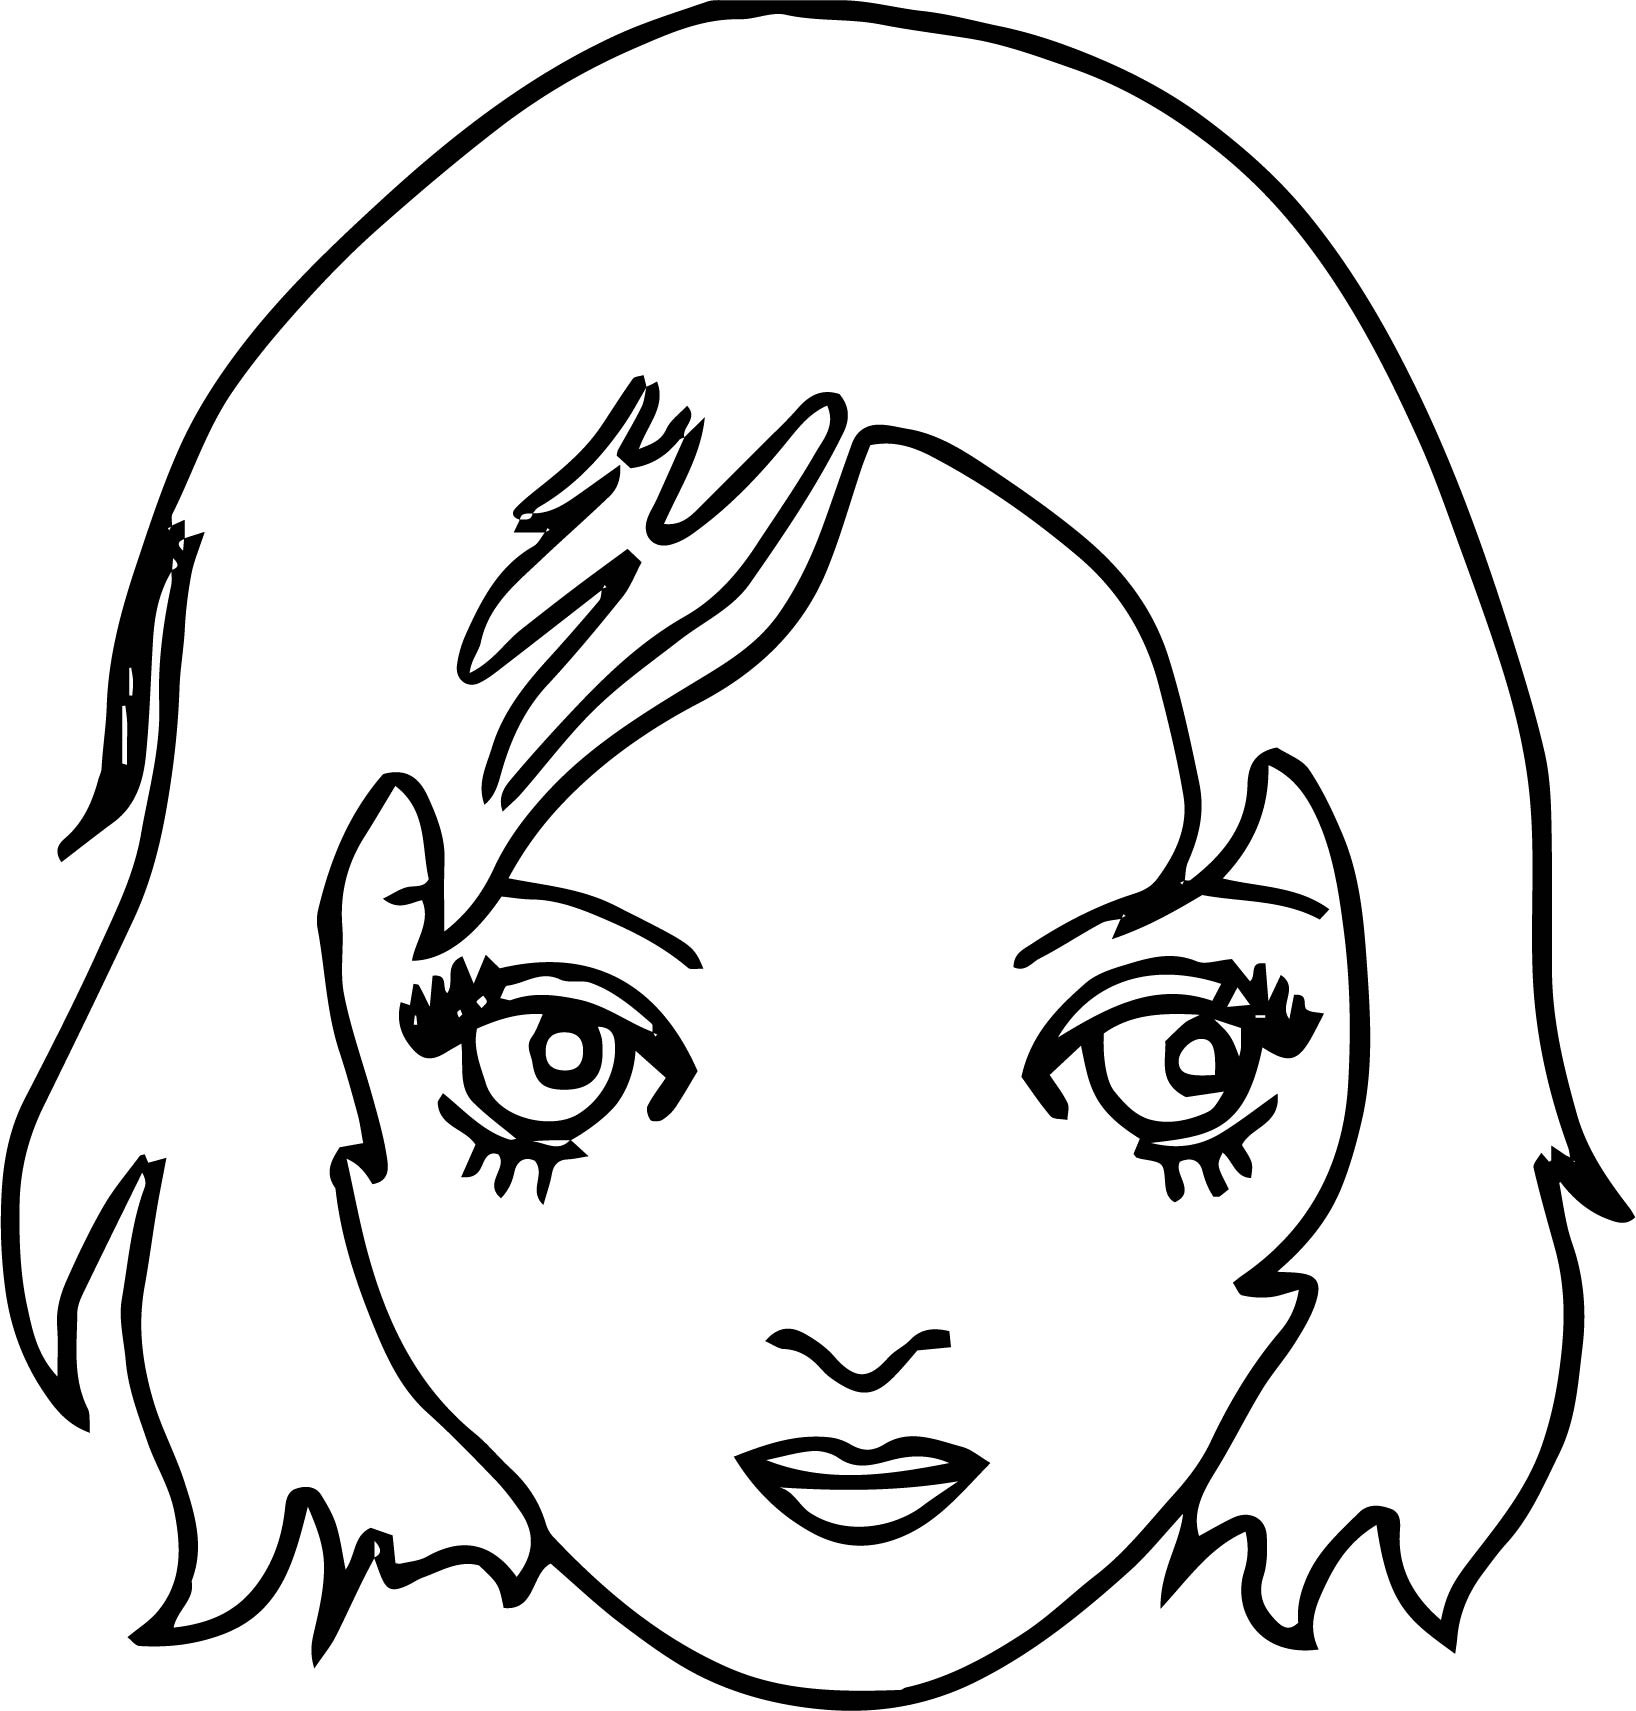 Girl Face Coloring Pages
 New Girl Face Coloring Page